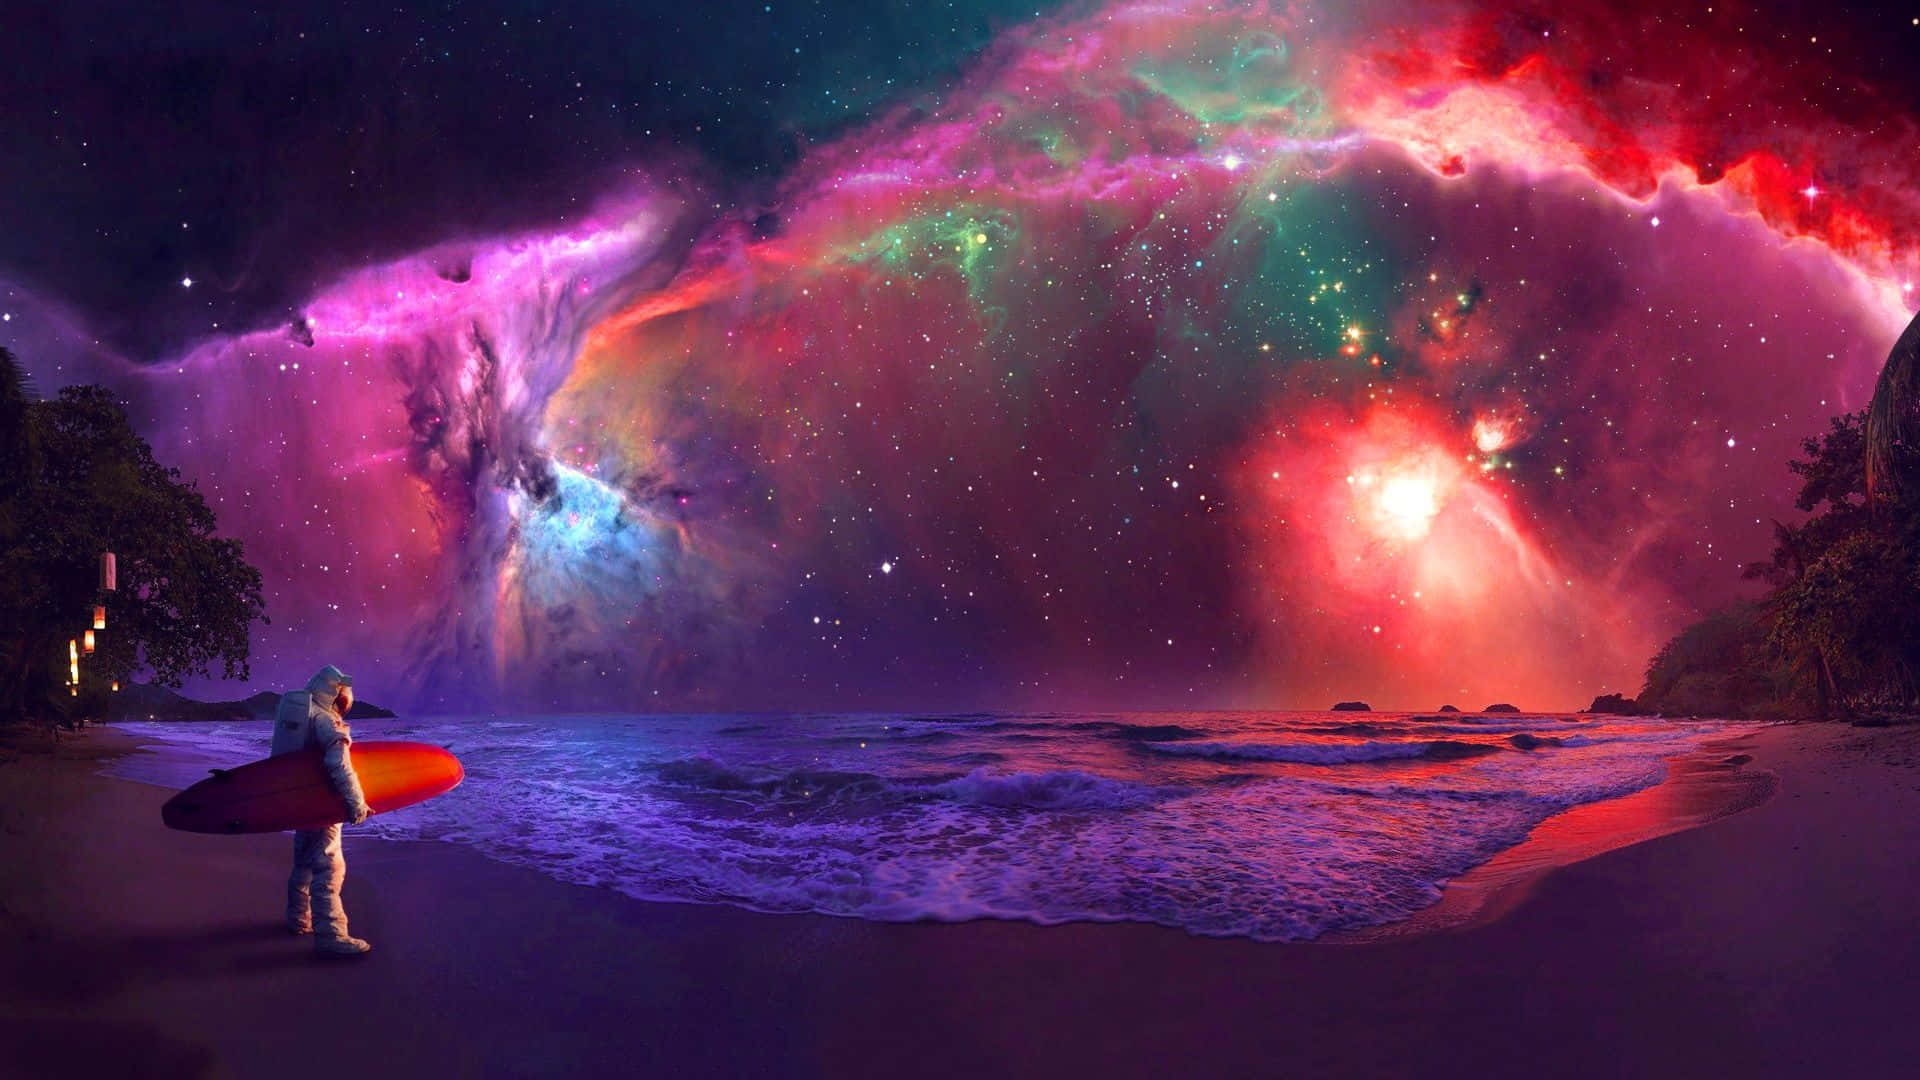 “Adventuring through the cosmos, the trippy astronaut is full of curiosity and exploration” Wallpaper